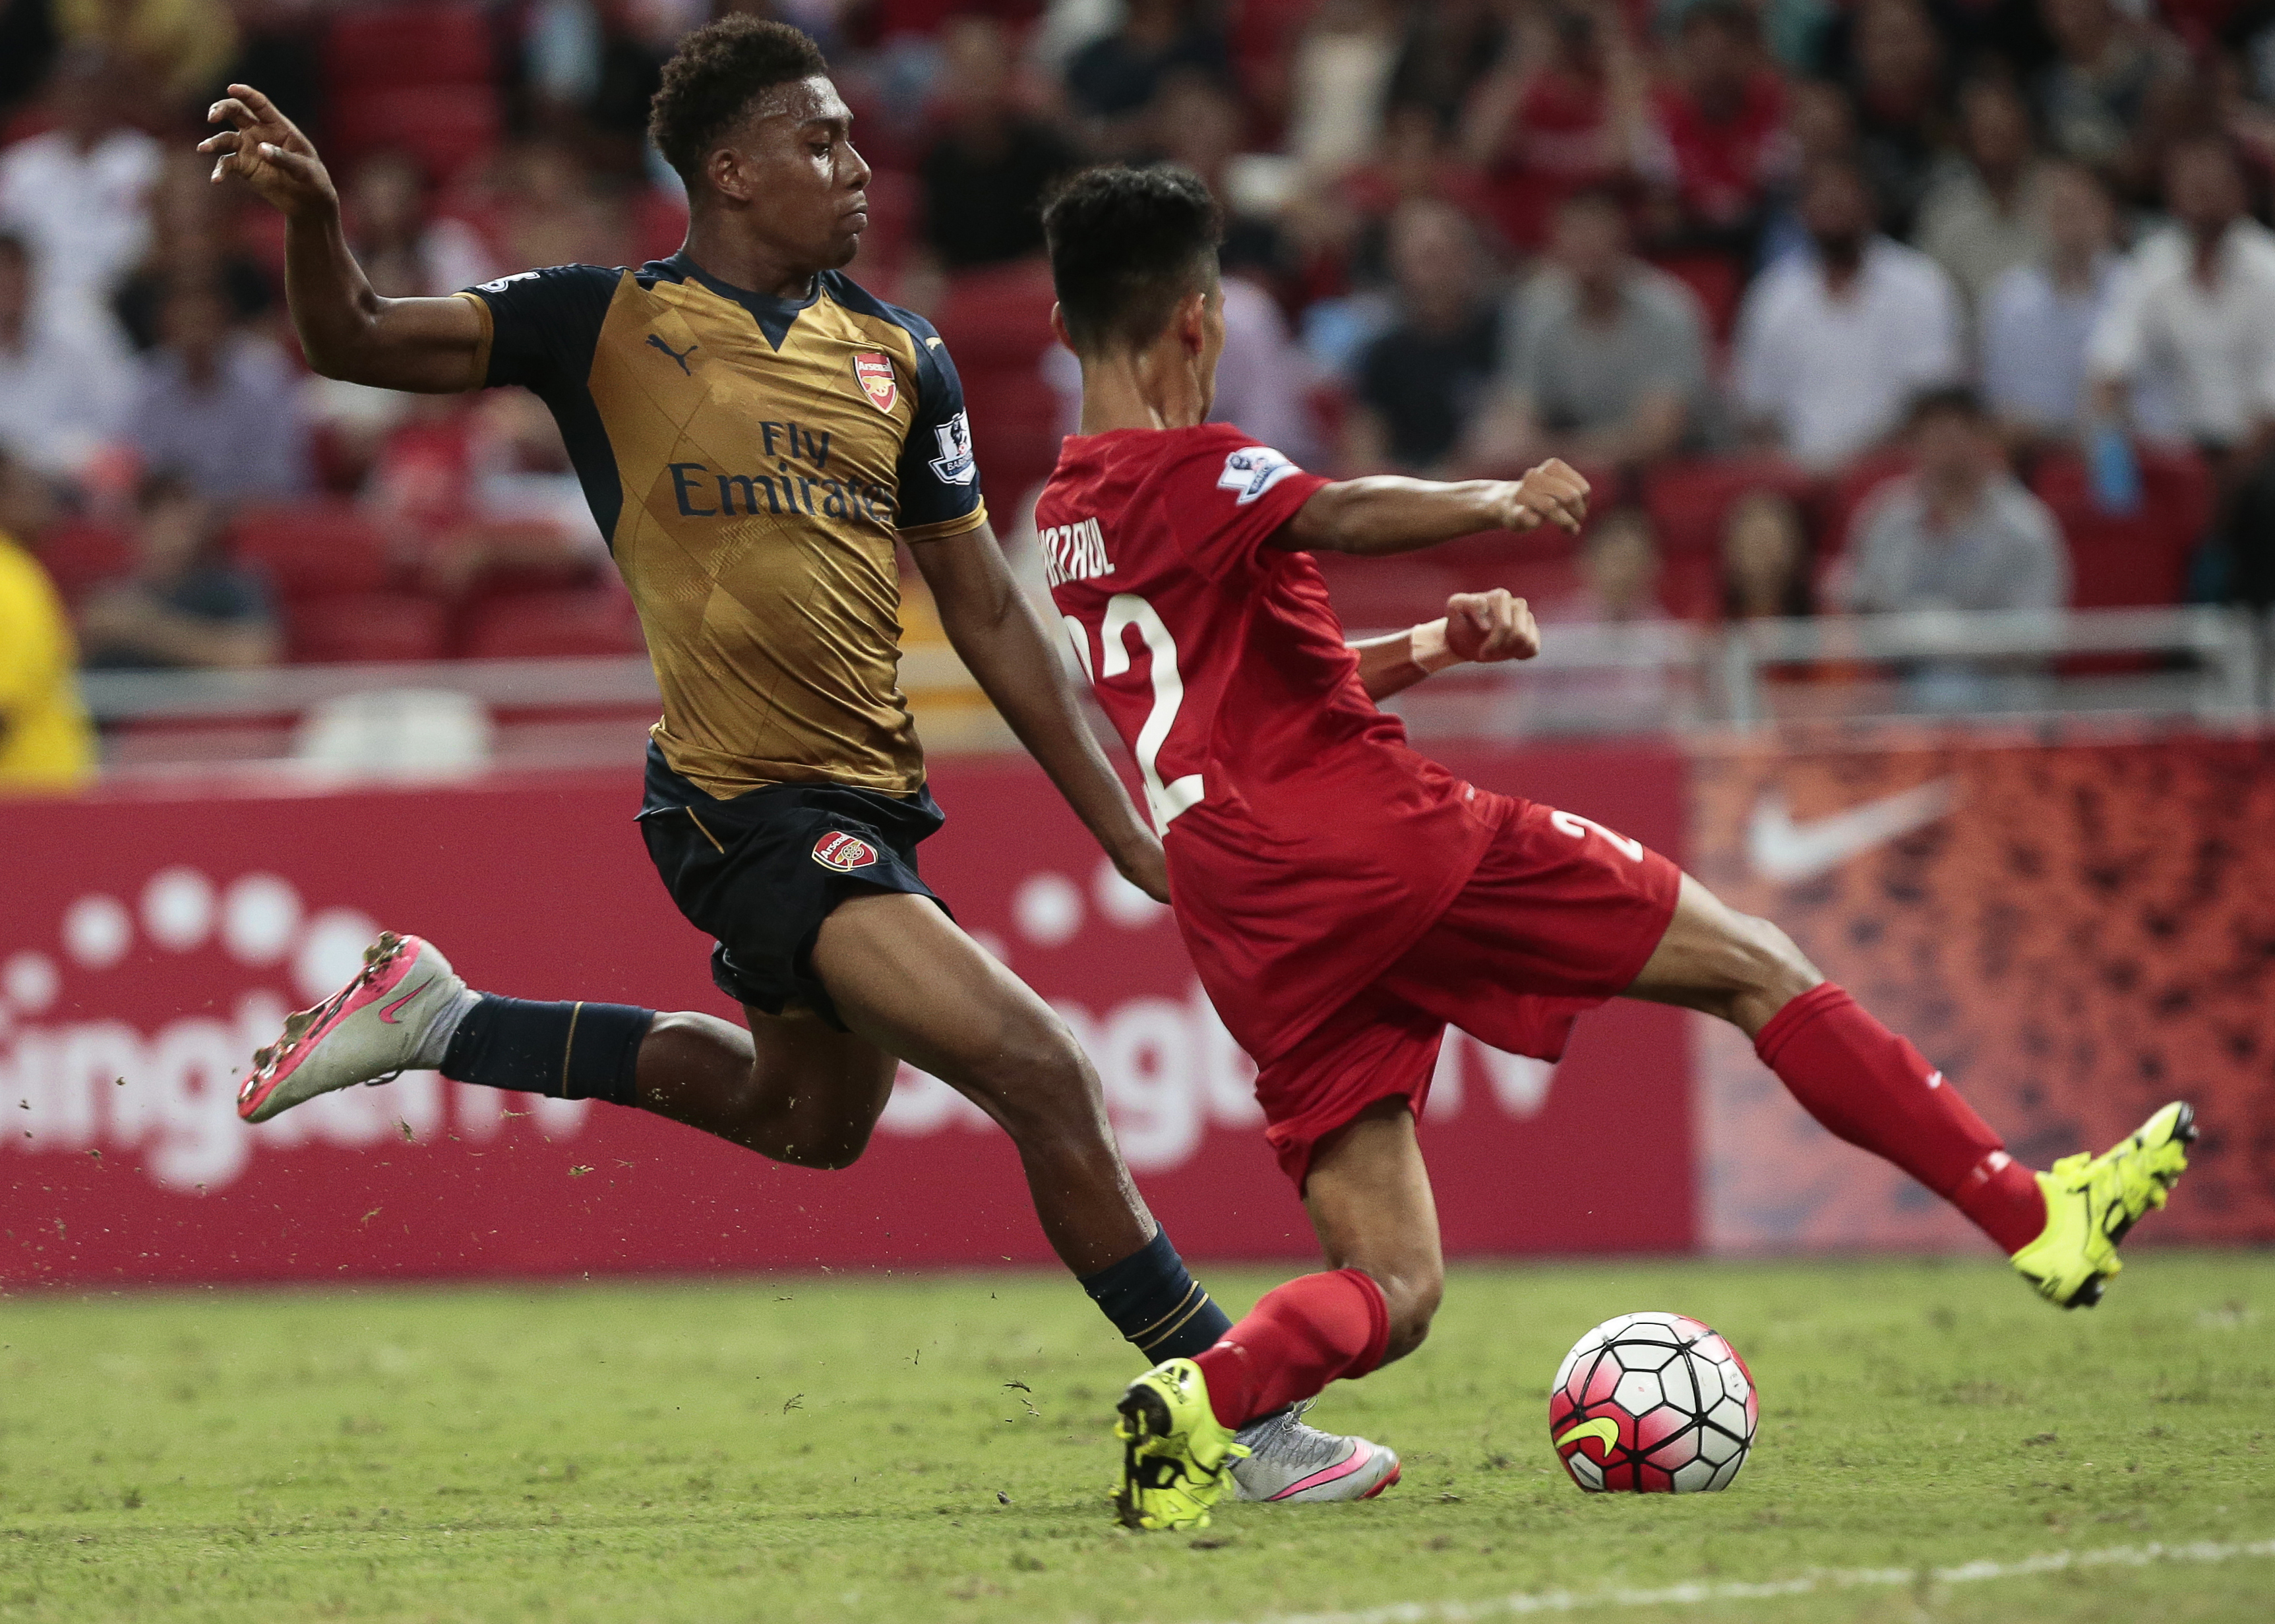 epa04847841 Arsenal's Alex Iwobi (L) in action against Singapore Selection's Nazrul Nazari (R) during the Barclays Asia Trophy soccer match between Arsenal FC and a Singapore Selection at the National Stadium in Singapore, 15 July 2015. The Barclays Asia Trophy takes place on 15 and 18 July 2015 involving English Premier League teams Arsenal, Everton, and Stoke City and a Singapore Selection team.  EPA/WALLACE WOON